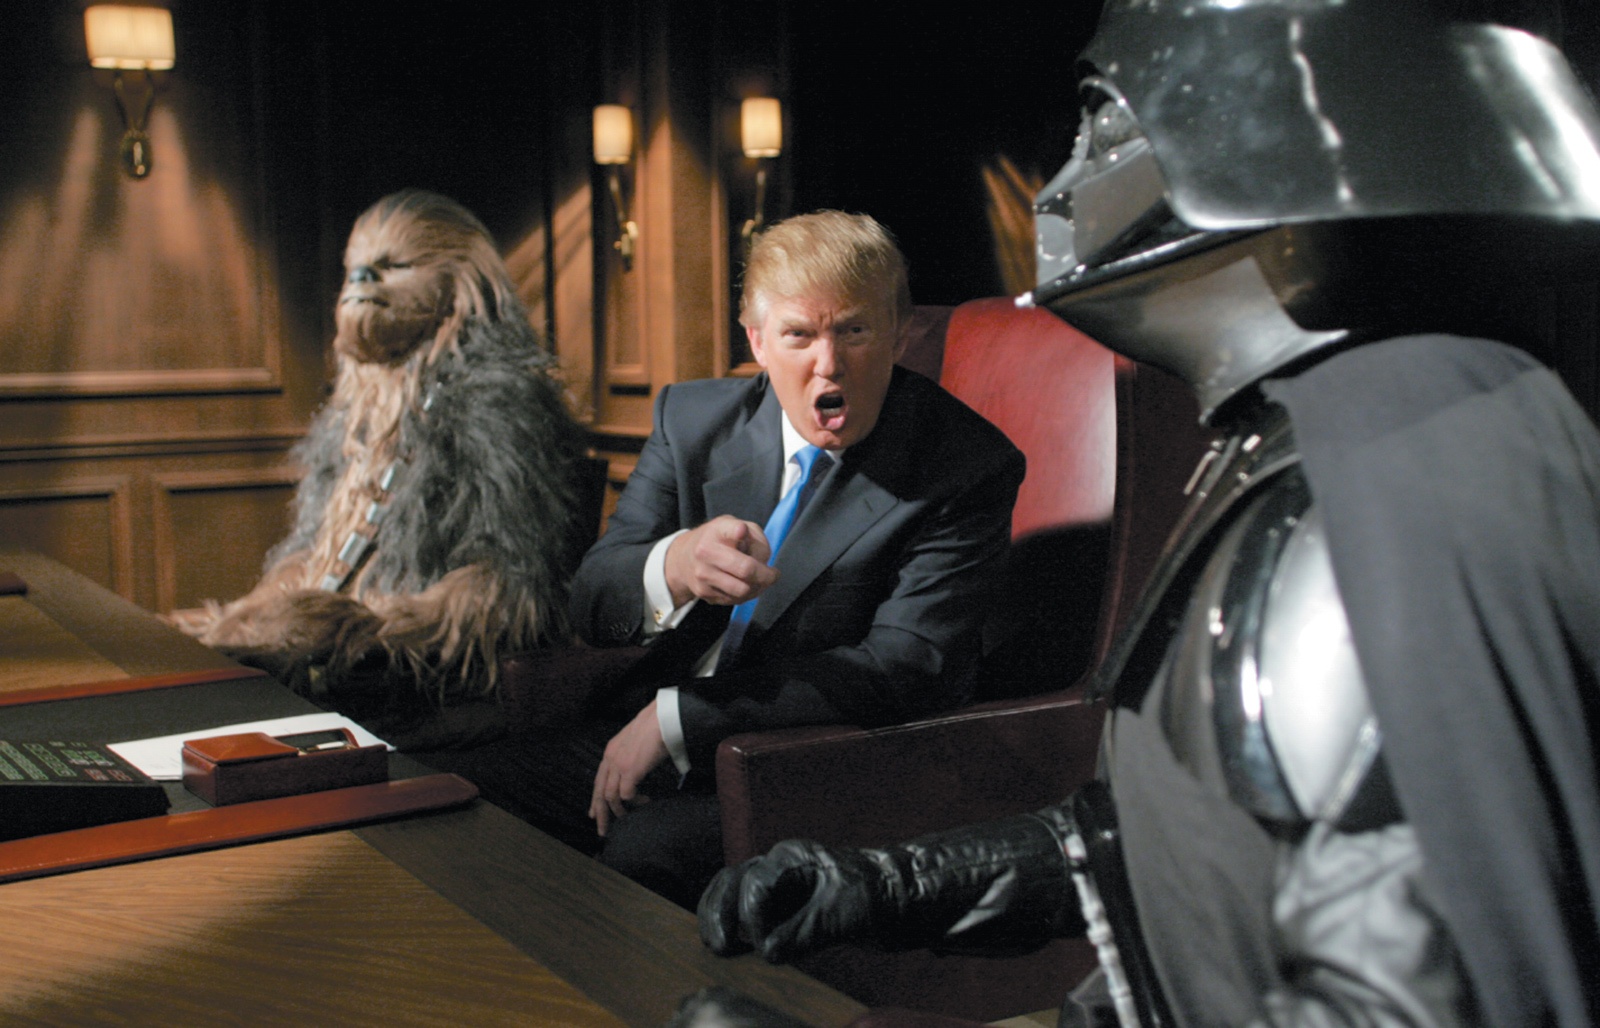 Donald Trump with Chewbacca and Darth Vader in a Star Wars–themed episode of The Apprentice, 2005